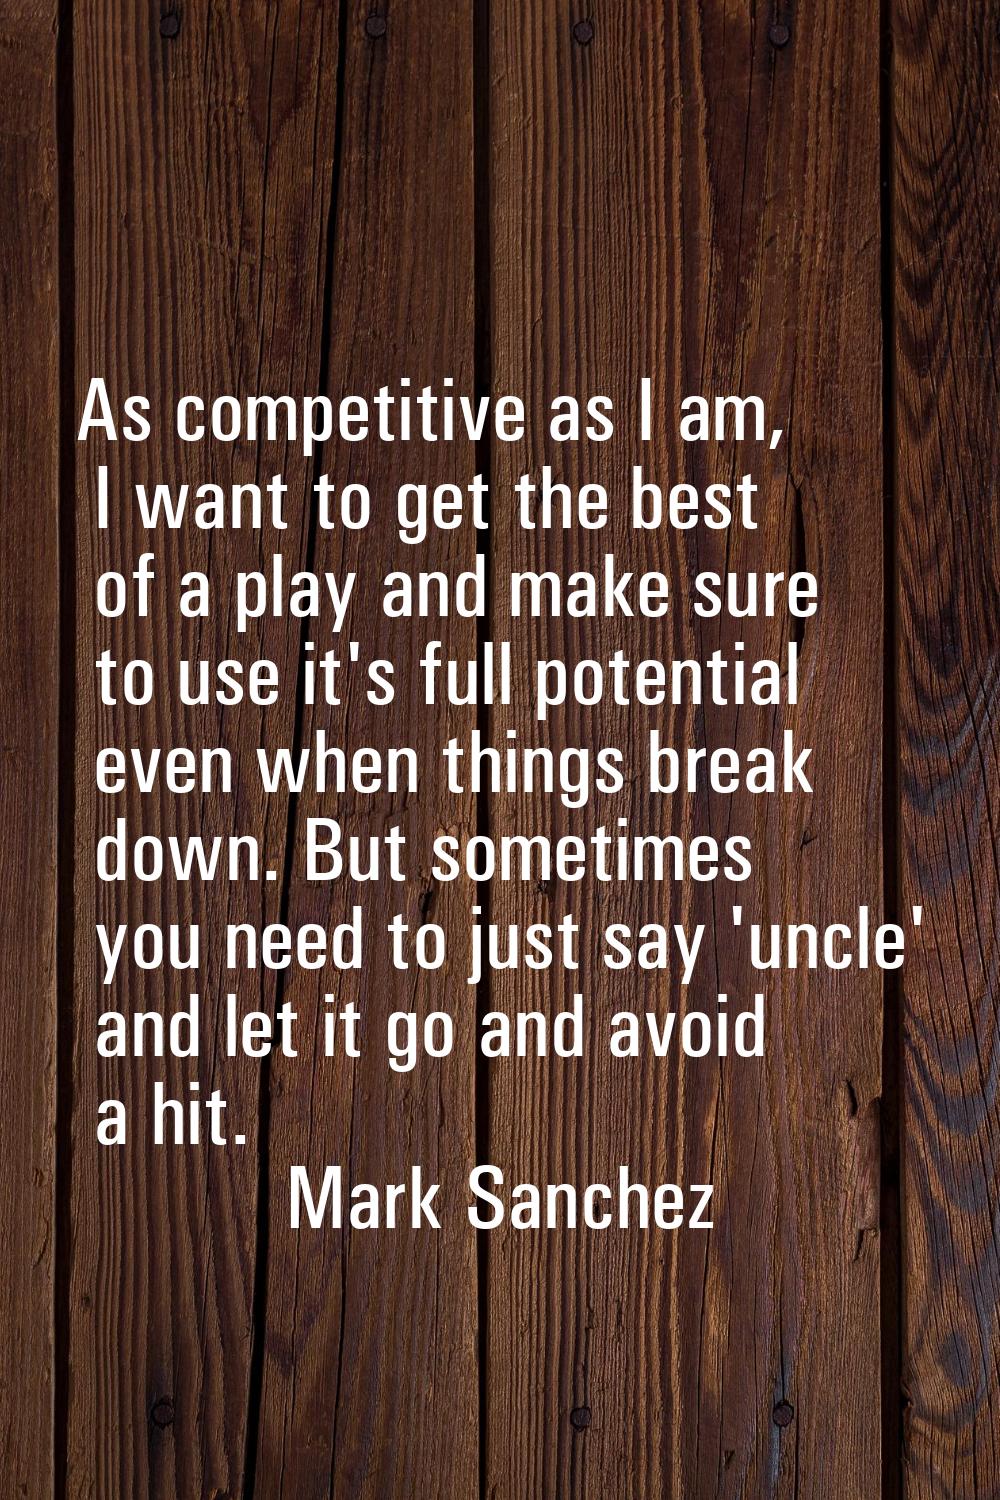 As competitive as I am, I want to get the best of a play and make sure to use it's full potential e